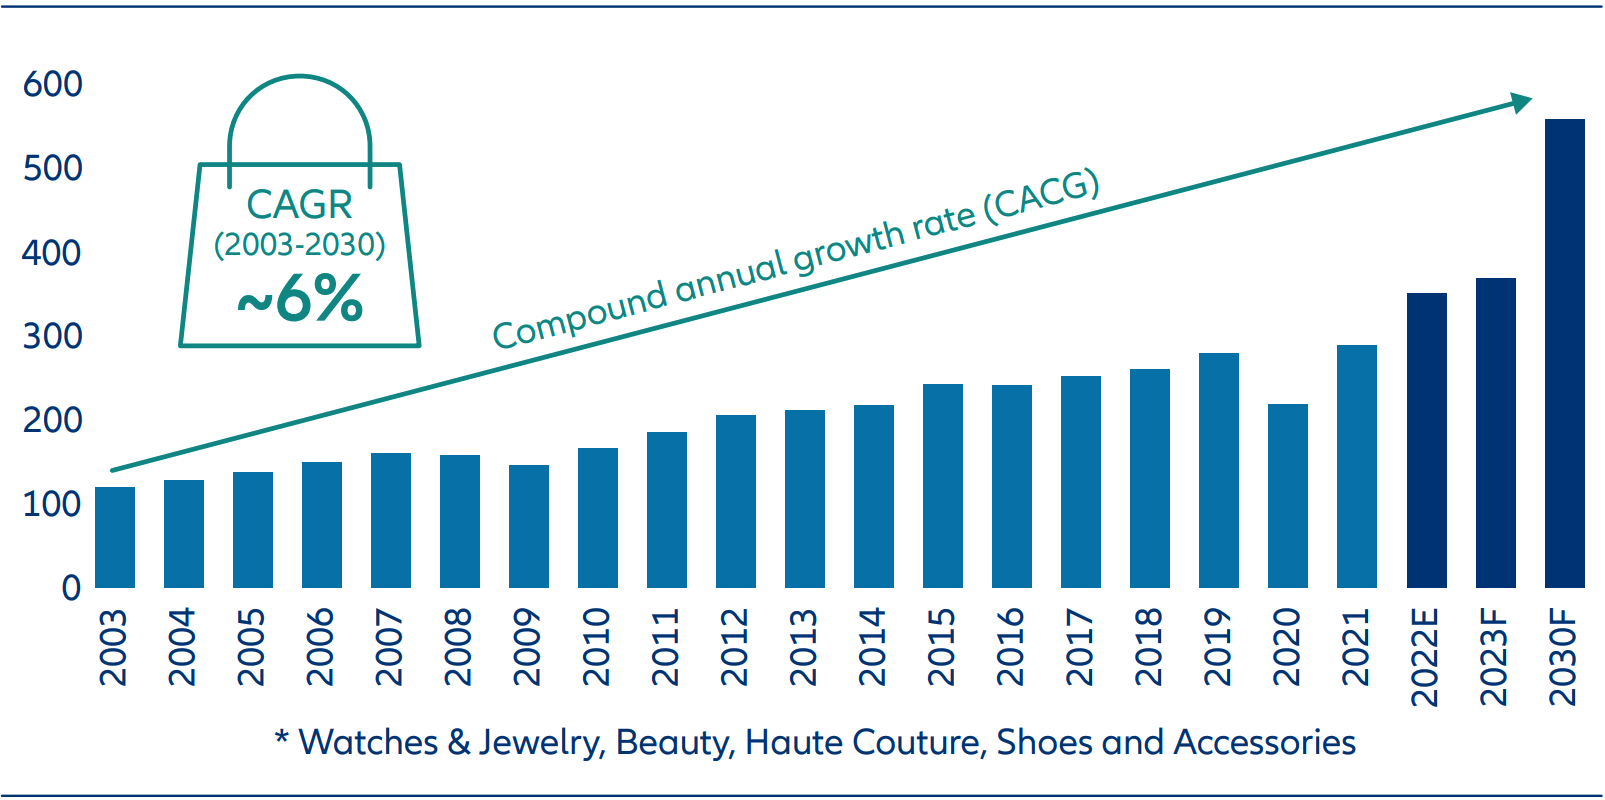 Personal luxury goods* revenues 2003 – 2030 (forecast) in € bn